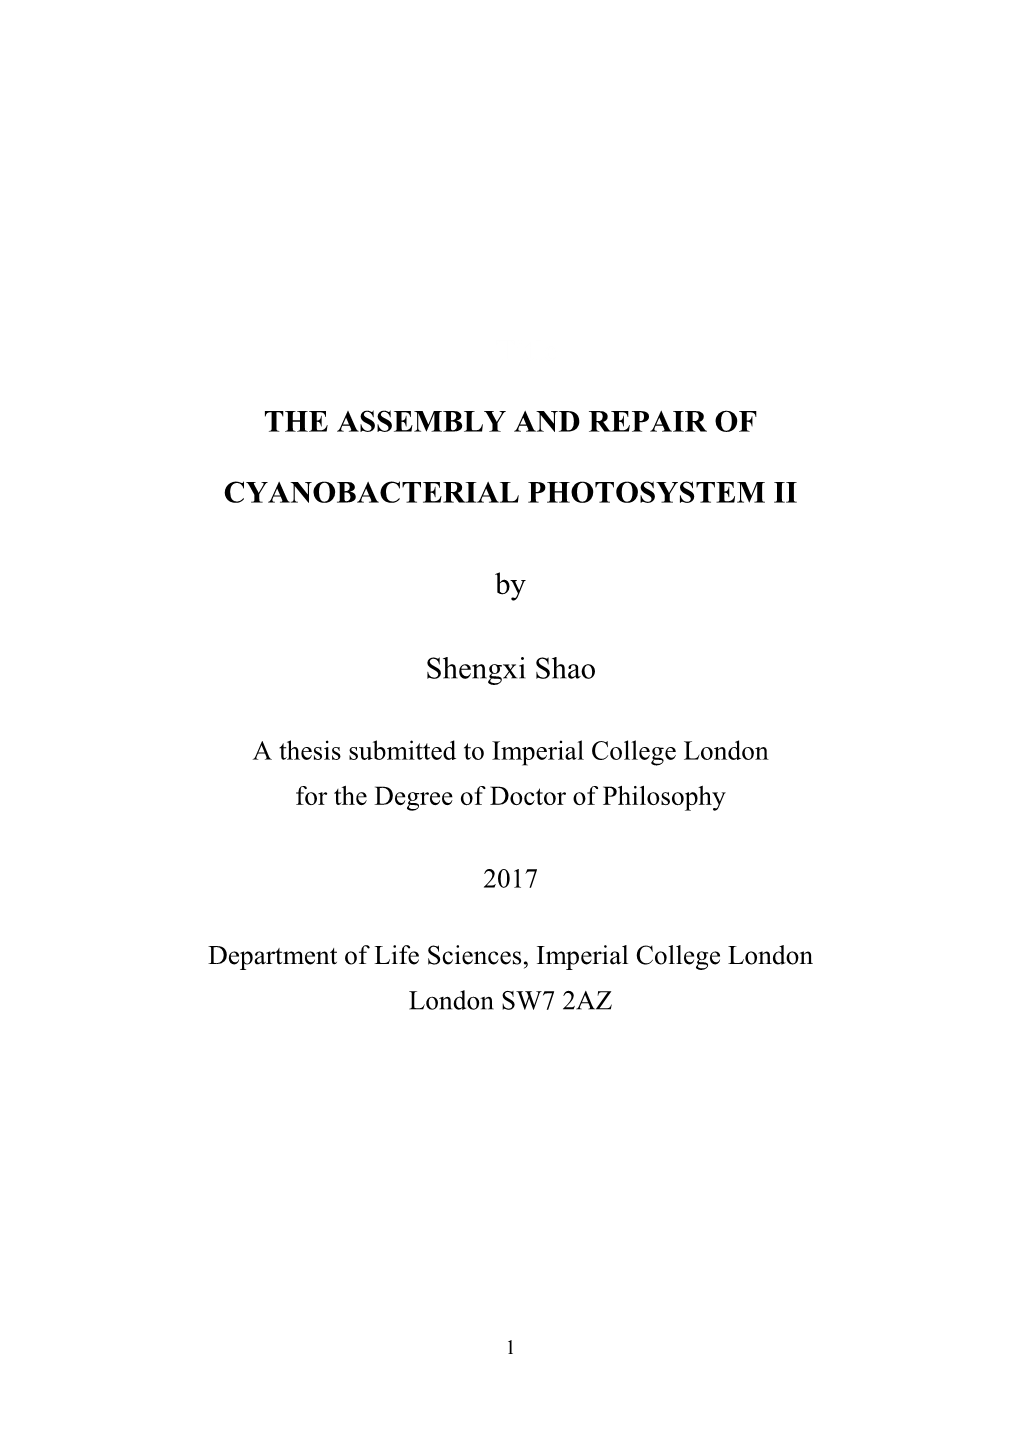 Title the ASSEMBLY and REPAIR of CYANOBACTERIAL